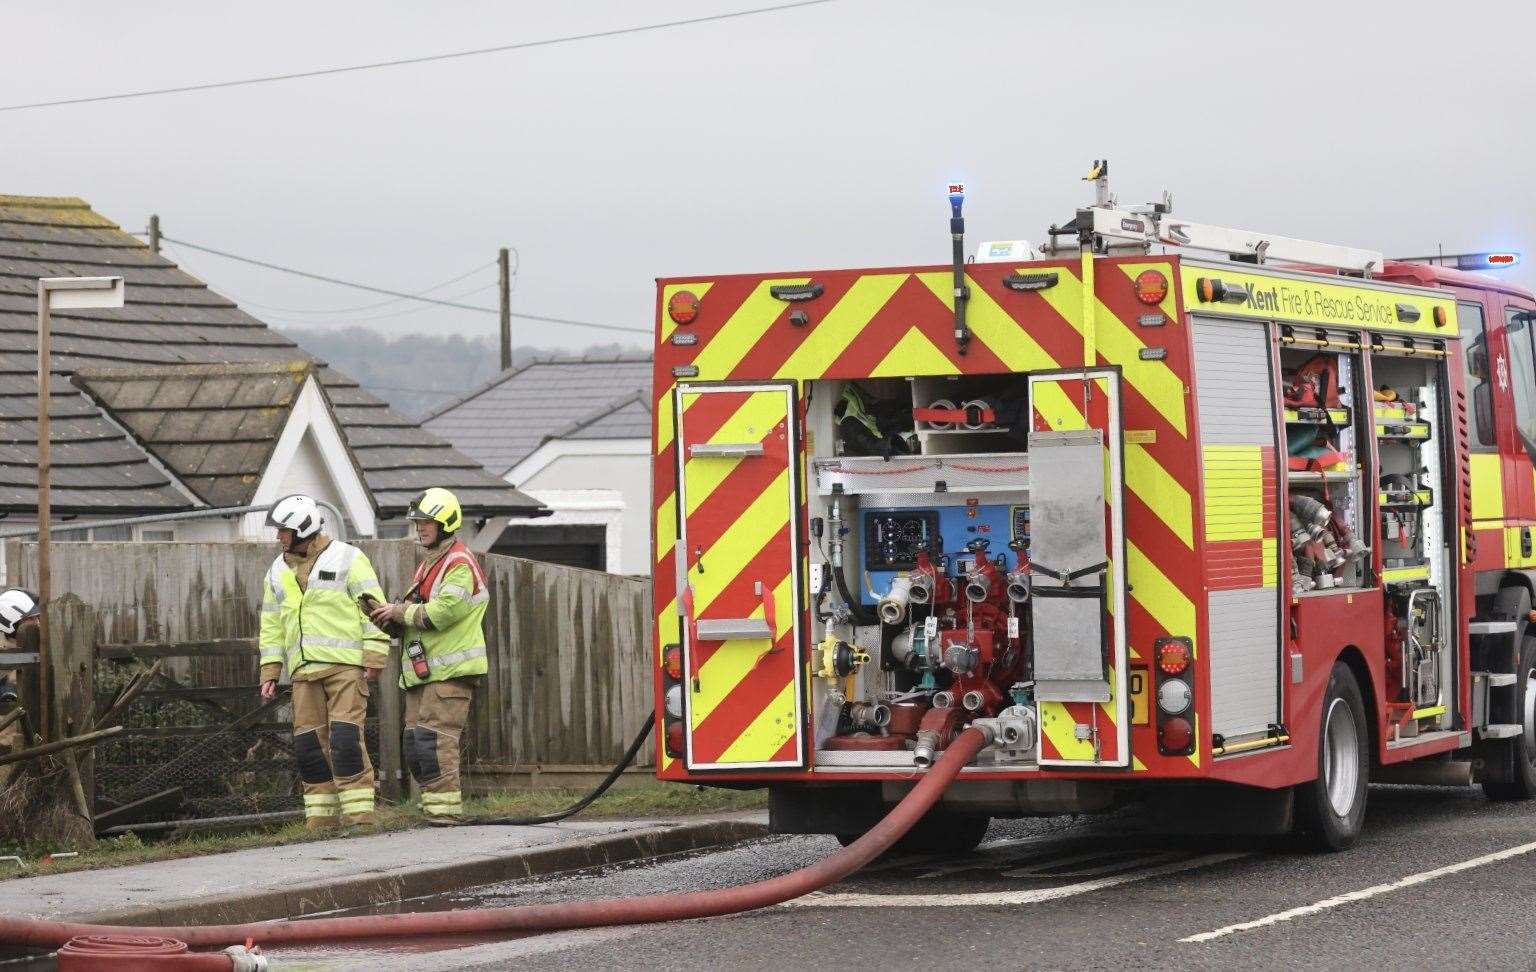 Fire crews were called after a blaze broke out in Hythe. Picture: UKNIP